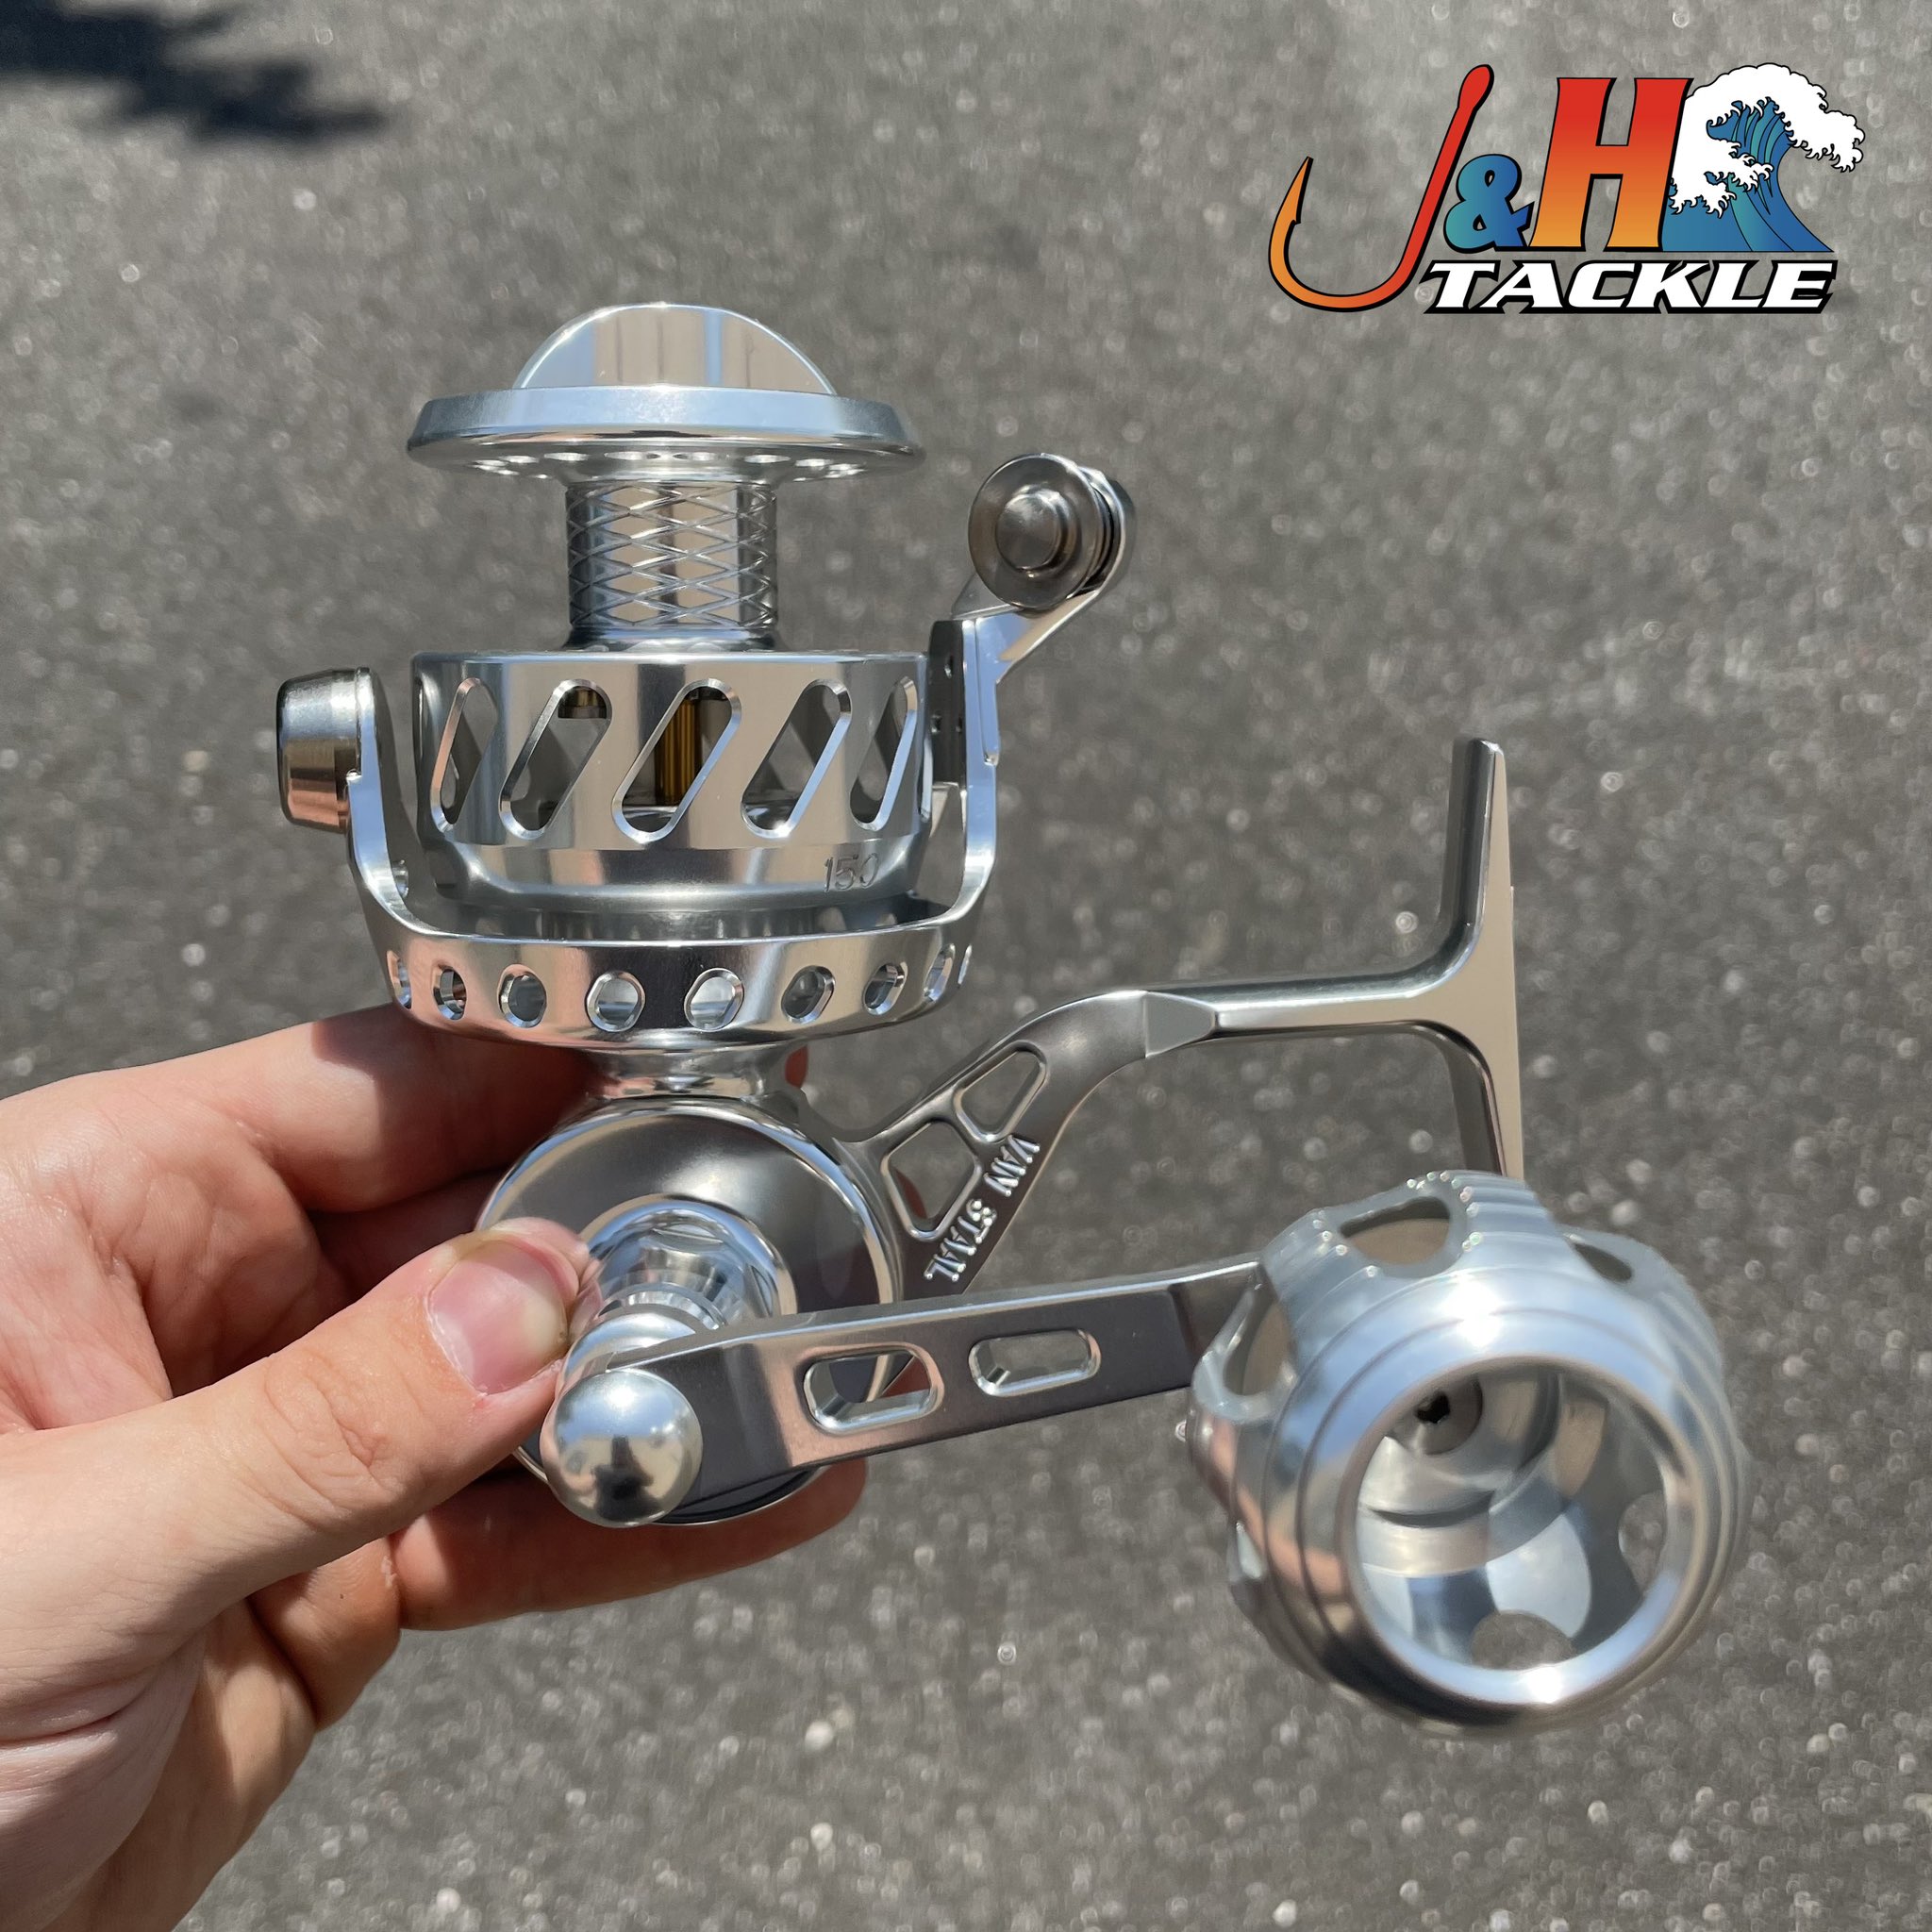 J&H Tackle on X: NEW Silver Van Staal VS X2 150 Spinning Reels are in  stock! You can't go wrong with one of these! $819.95   #jandhtackle #fishing #surfcasting #vanstaal  #spinningreel #fishingreel #